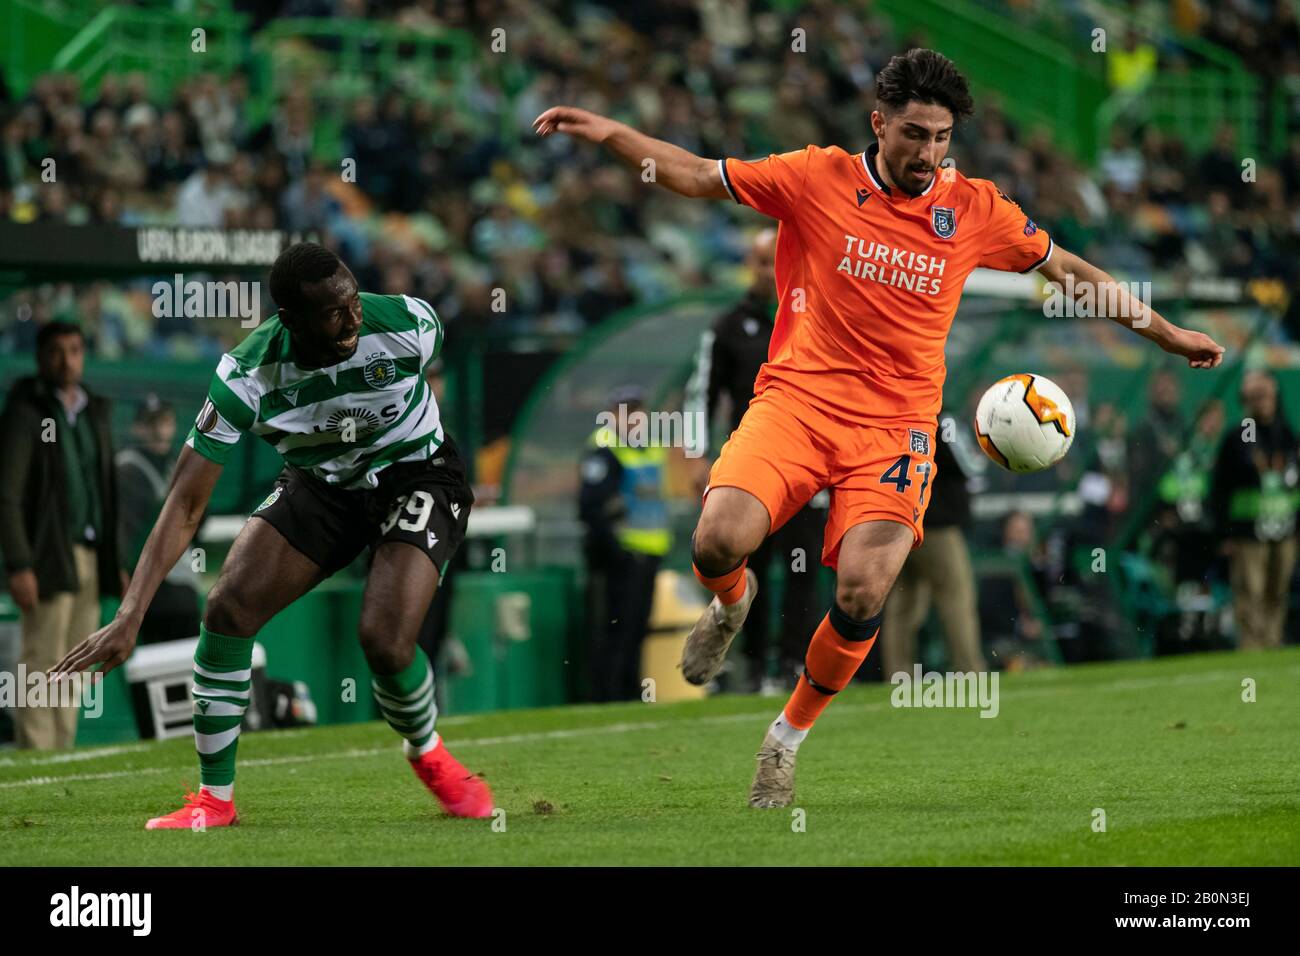 Istanbul Ba?ak?ehir FK player Berkay Ozcan (R) and Sporting CP Yannick Bolasie (L) are seen in action during the UEFA Europa League Match 2019/20, Sporting CP vs Istanbul Ba?ak?ehir FK at José Alvalade Stadium.(Final Score: Sporting CP 3 -1 Istanbul Ba?ak?ehir FK) Stock Photo